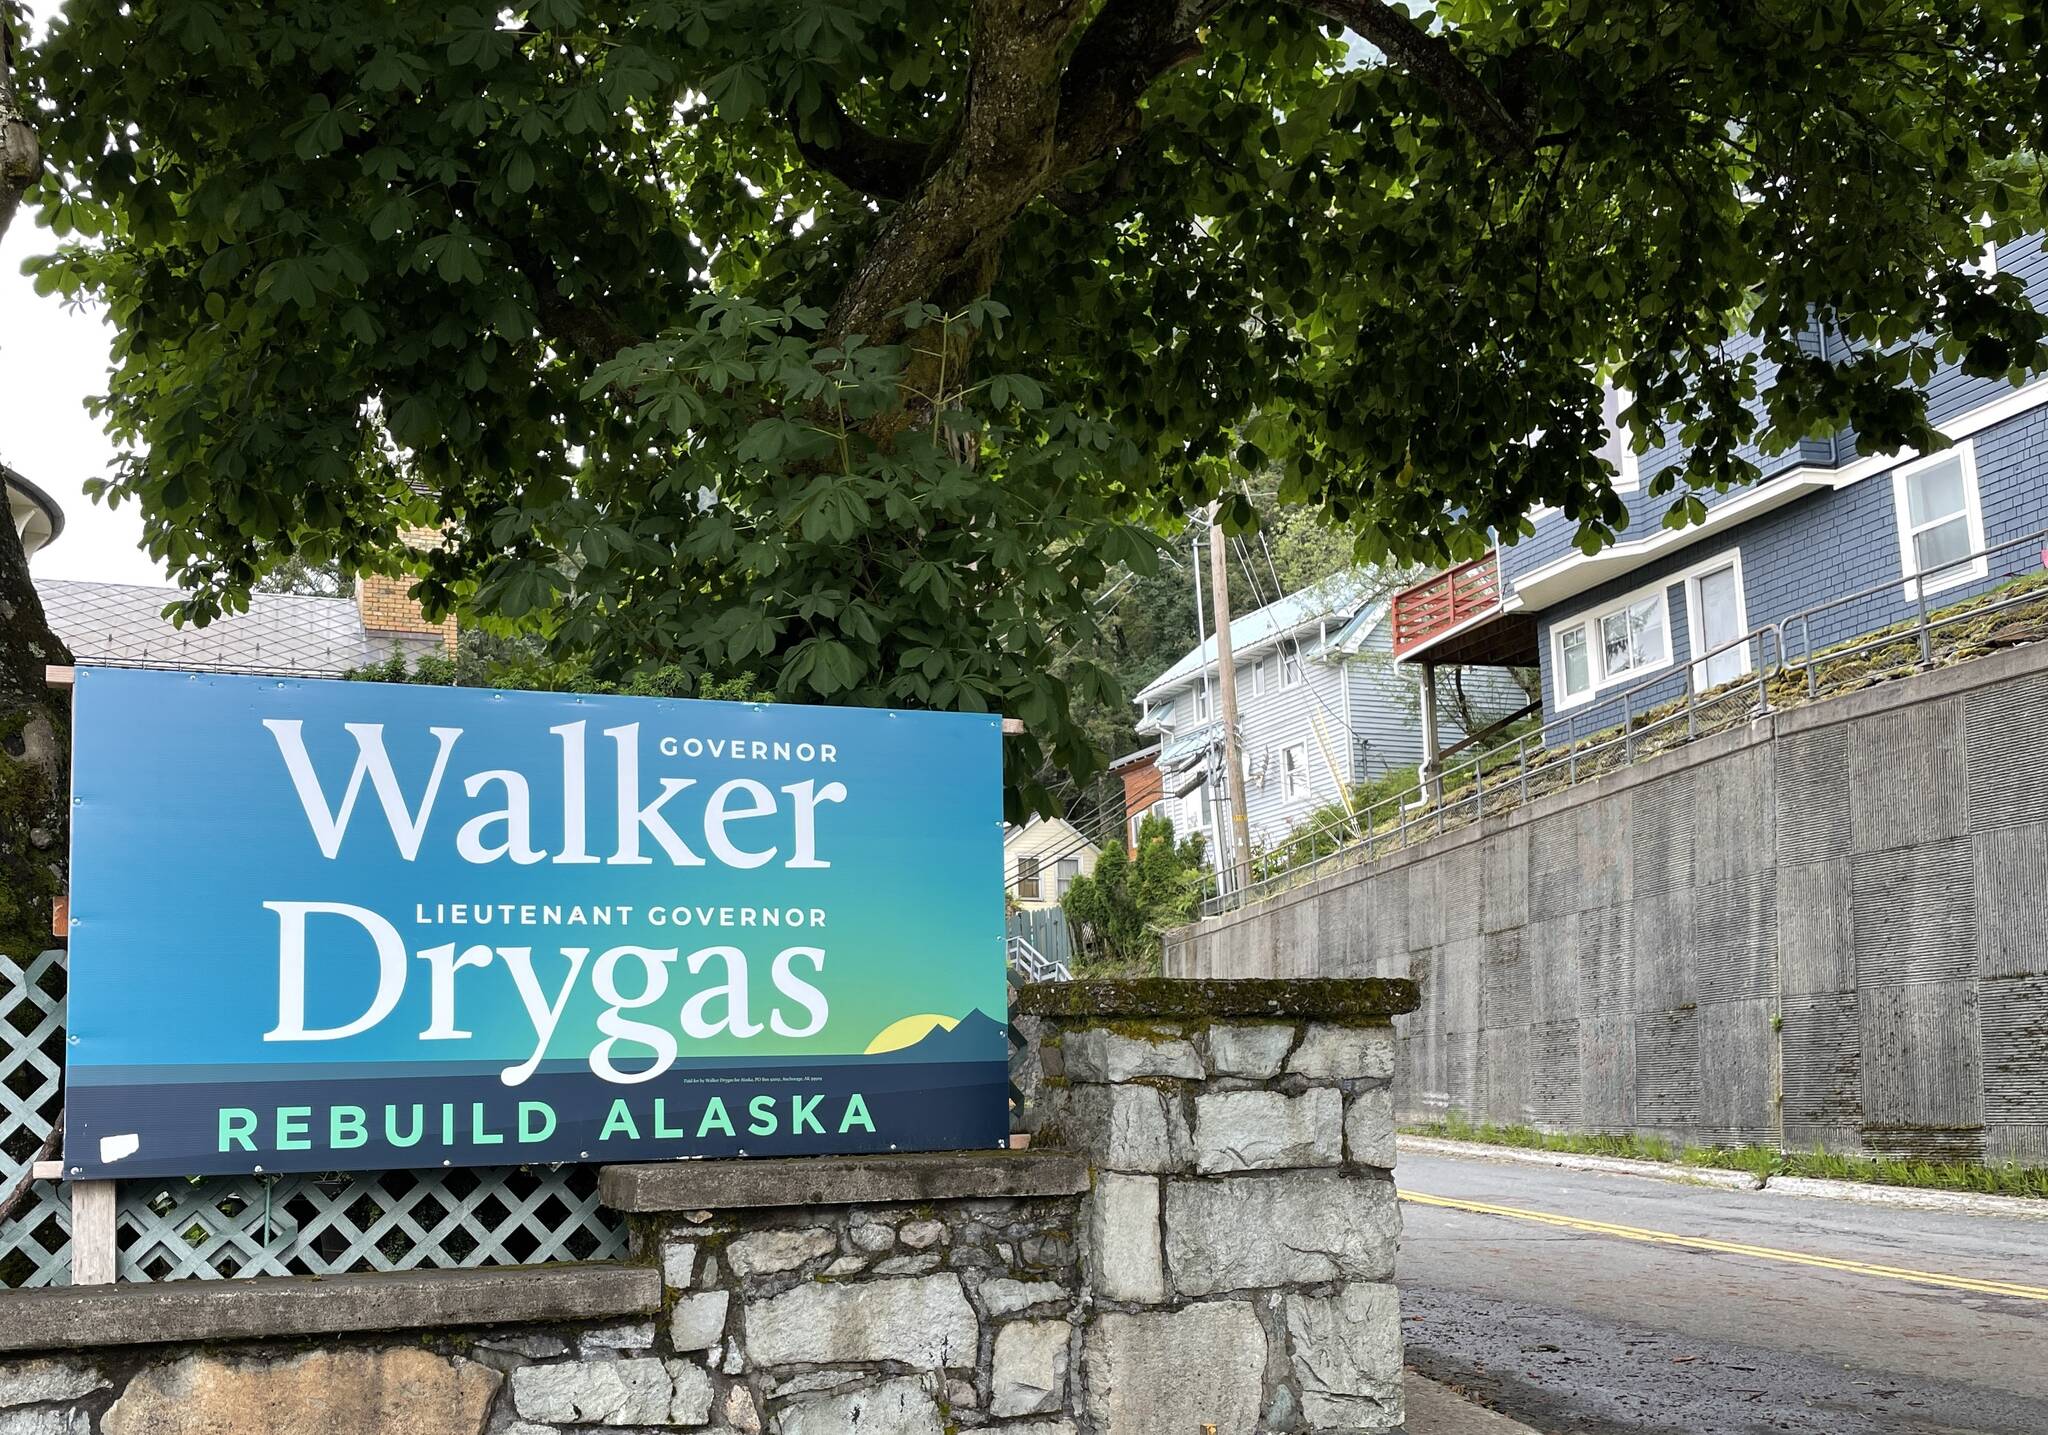 A Walker-Drygas campaign sign stands across from the governor’s mansion in Juneau. Financial forms recently filed with the state showed contributions to gubernatorial campaigns up sharply from the same time period four years ago. (Michael S. Lockett / Juneau Empire)